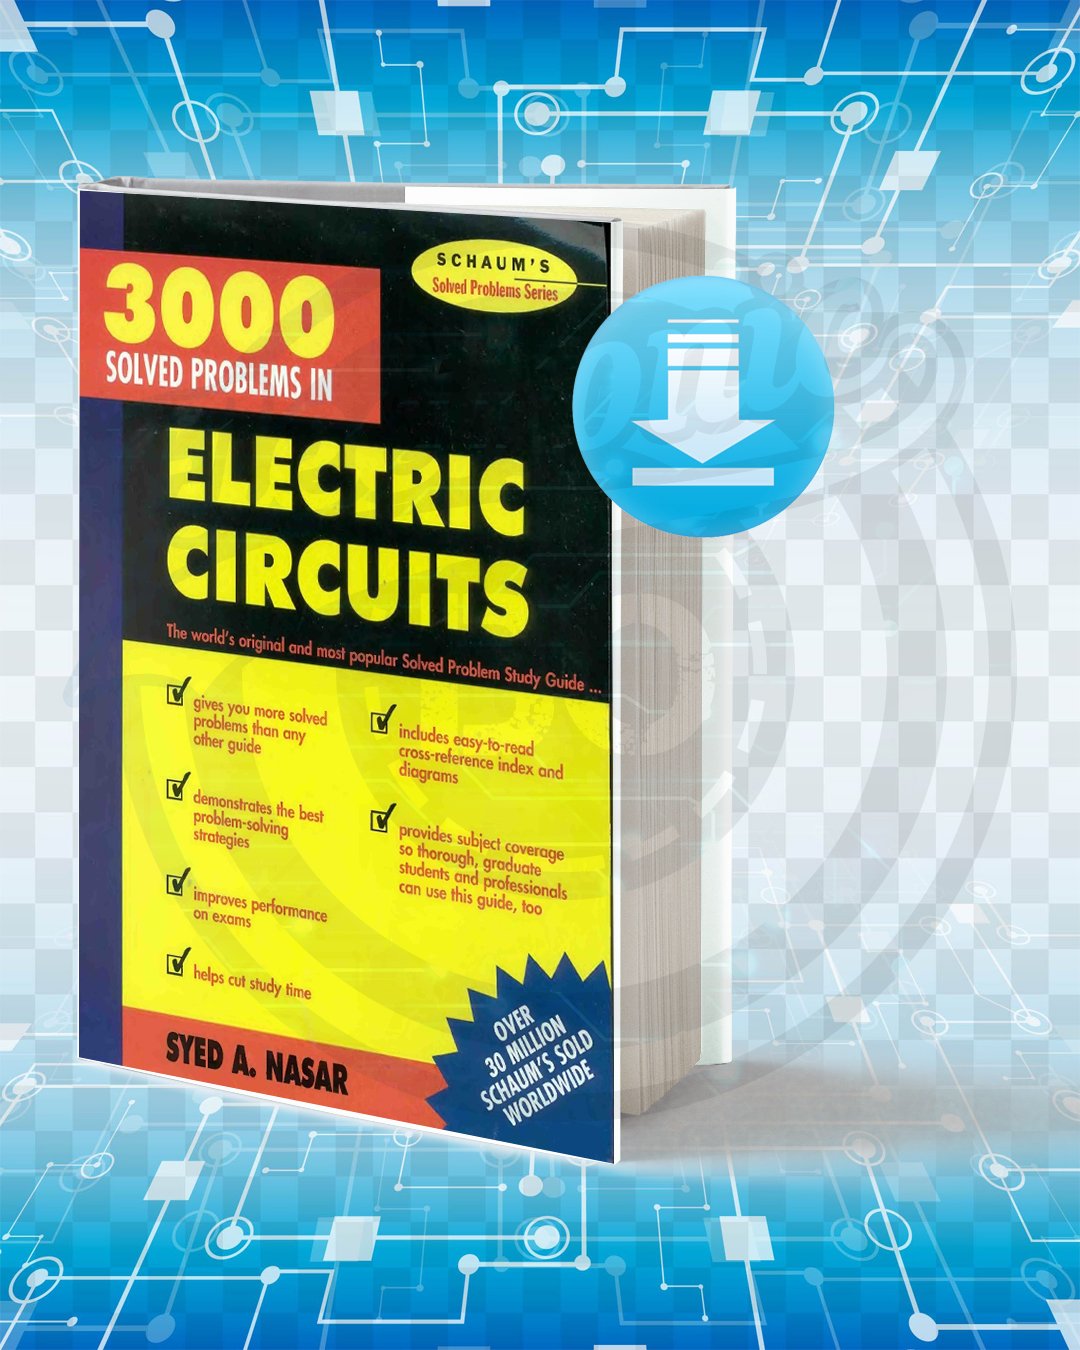 3 000 solved problems in electrical circuits pdf download android browser apk